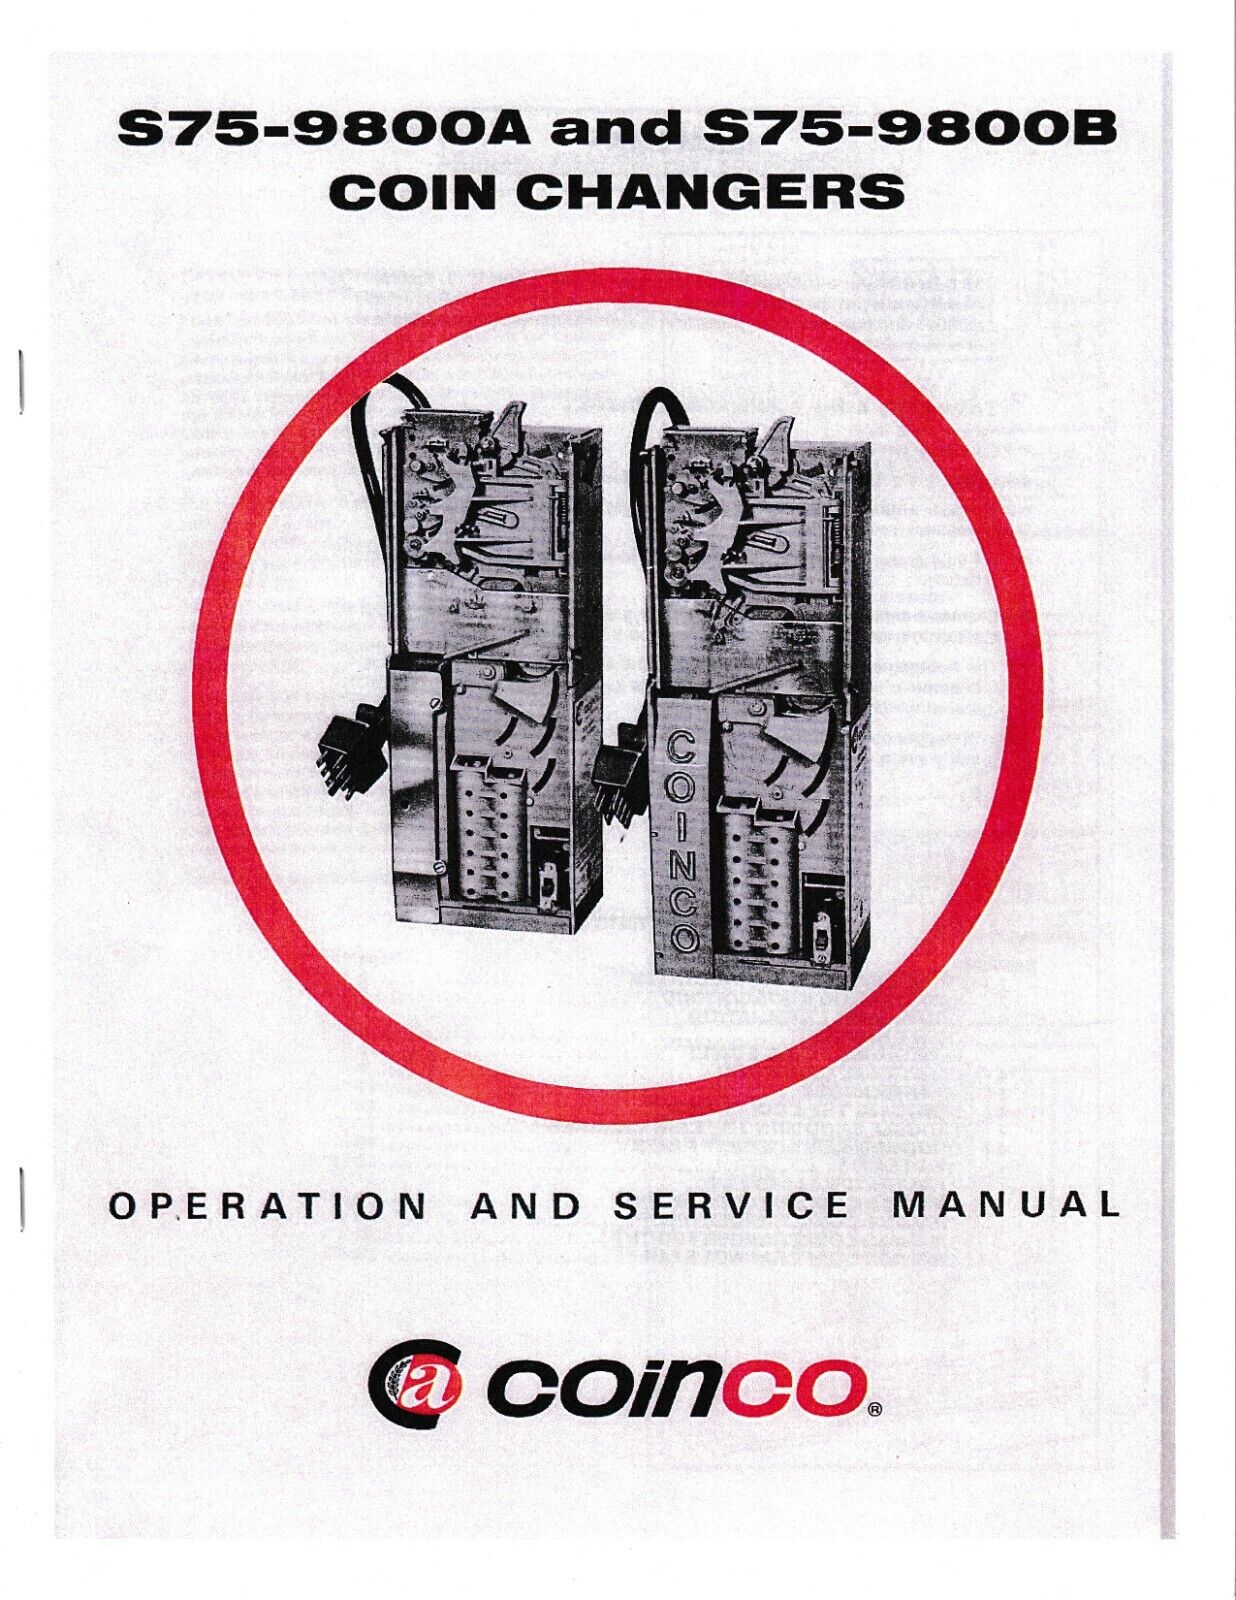 COINCO S75-9800A AND S75-9800B COIN CHANGER MANUAL - NEW